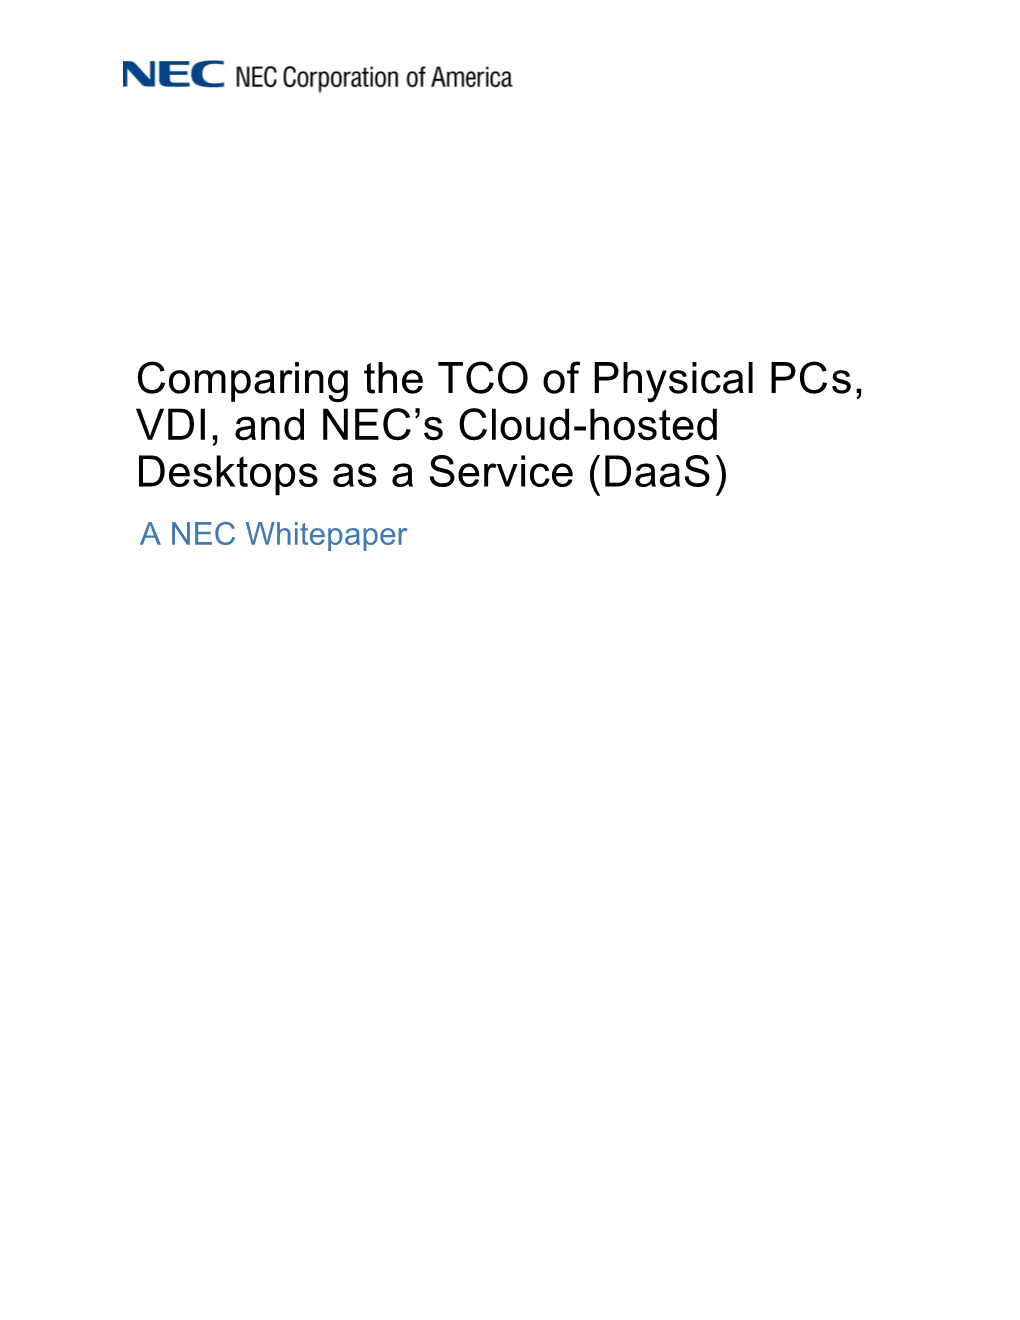 Comparing the TCO of Physical Pcs, VDI, and Cloud-Hosted NEC Desktops As a Service (Daas)